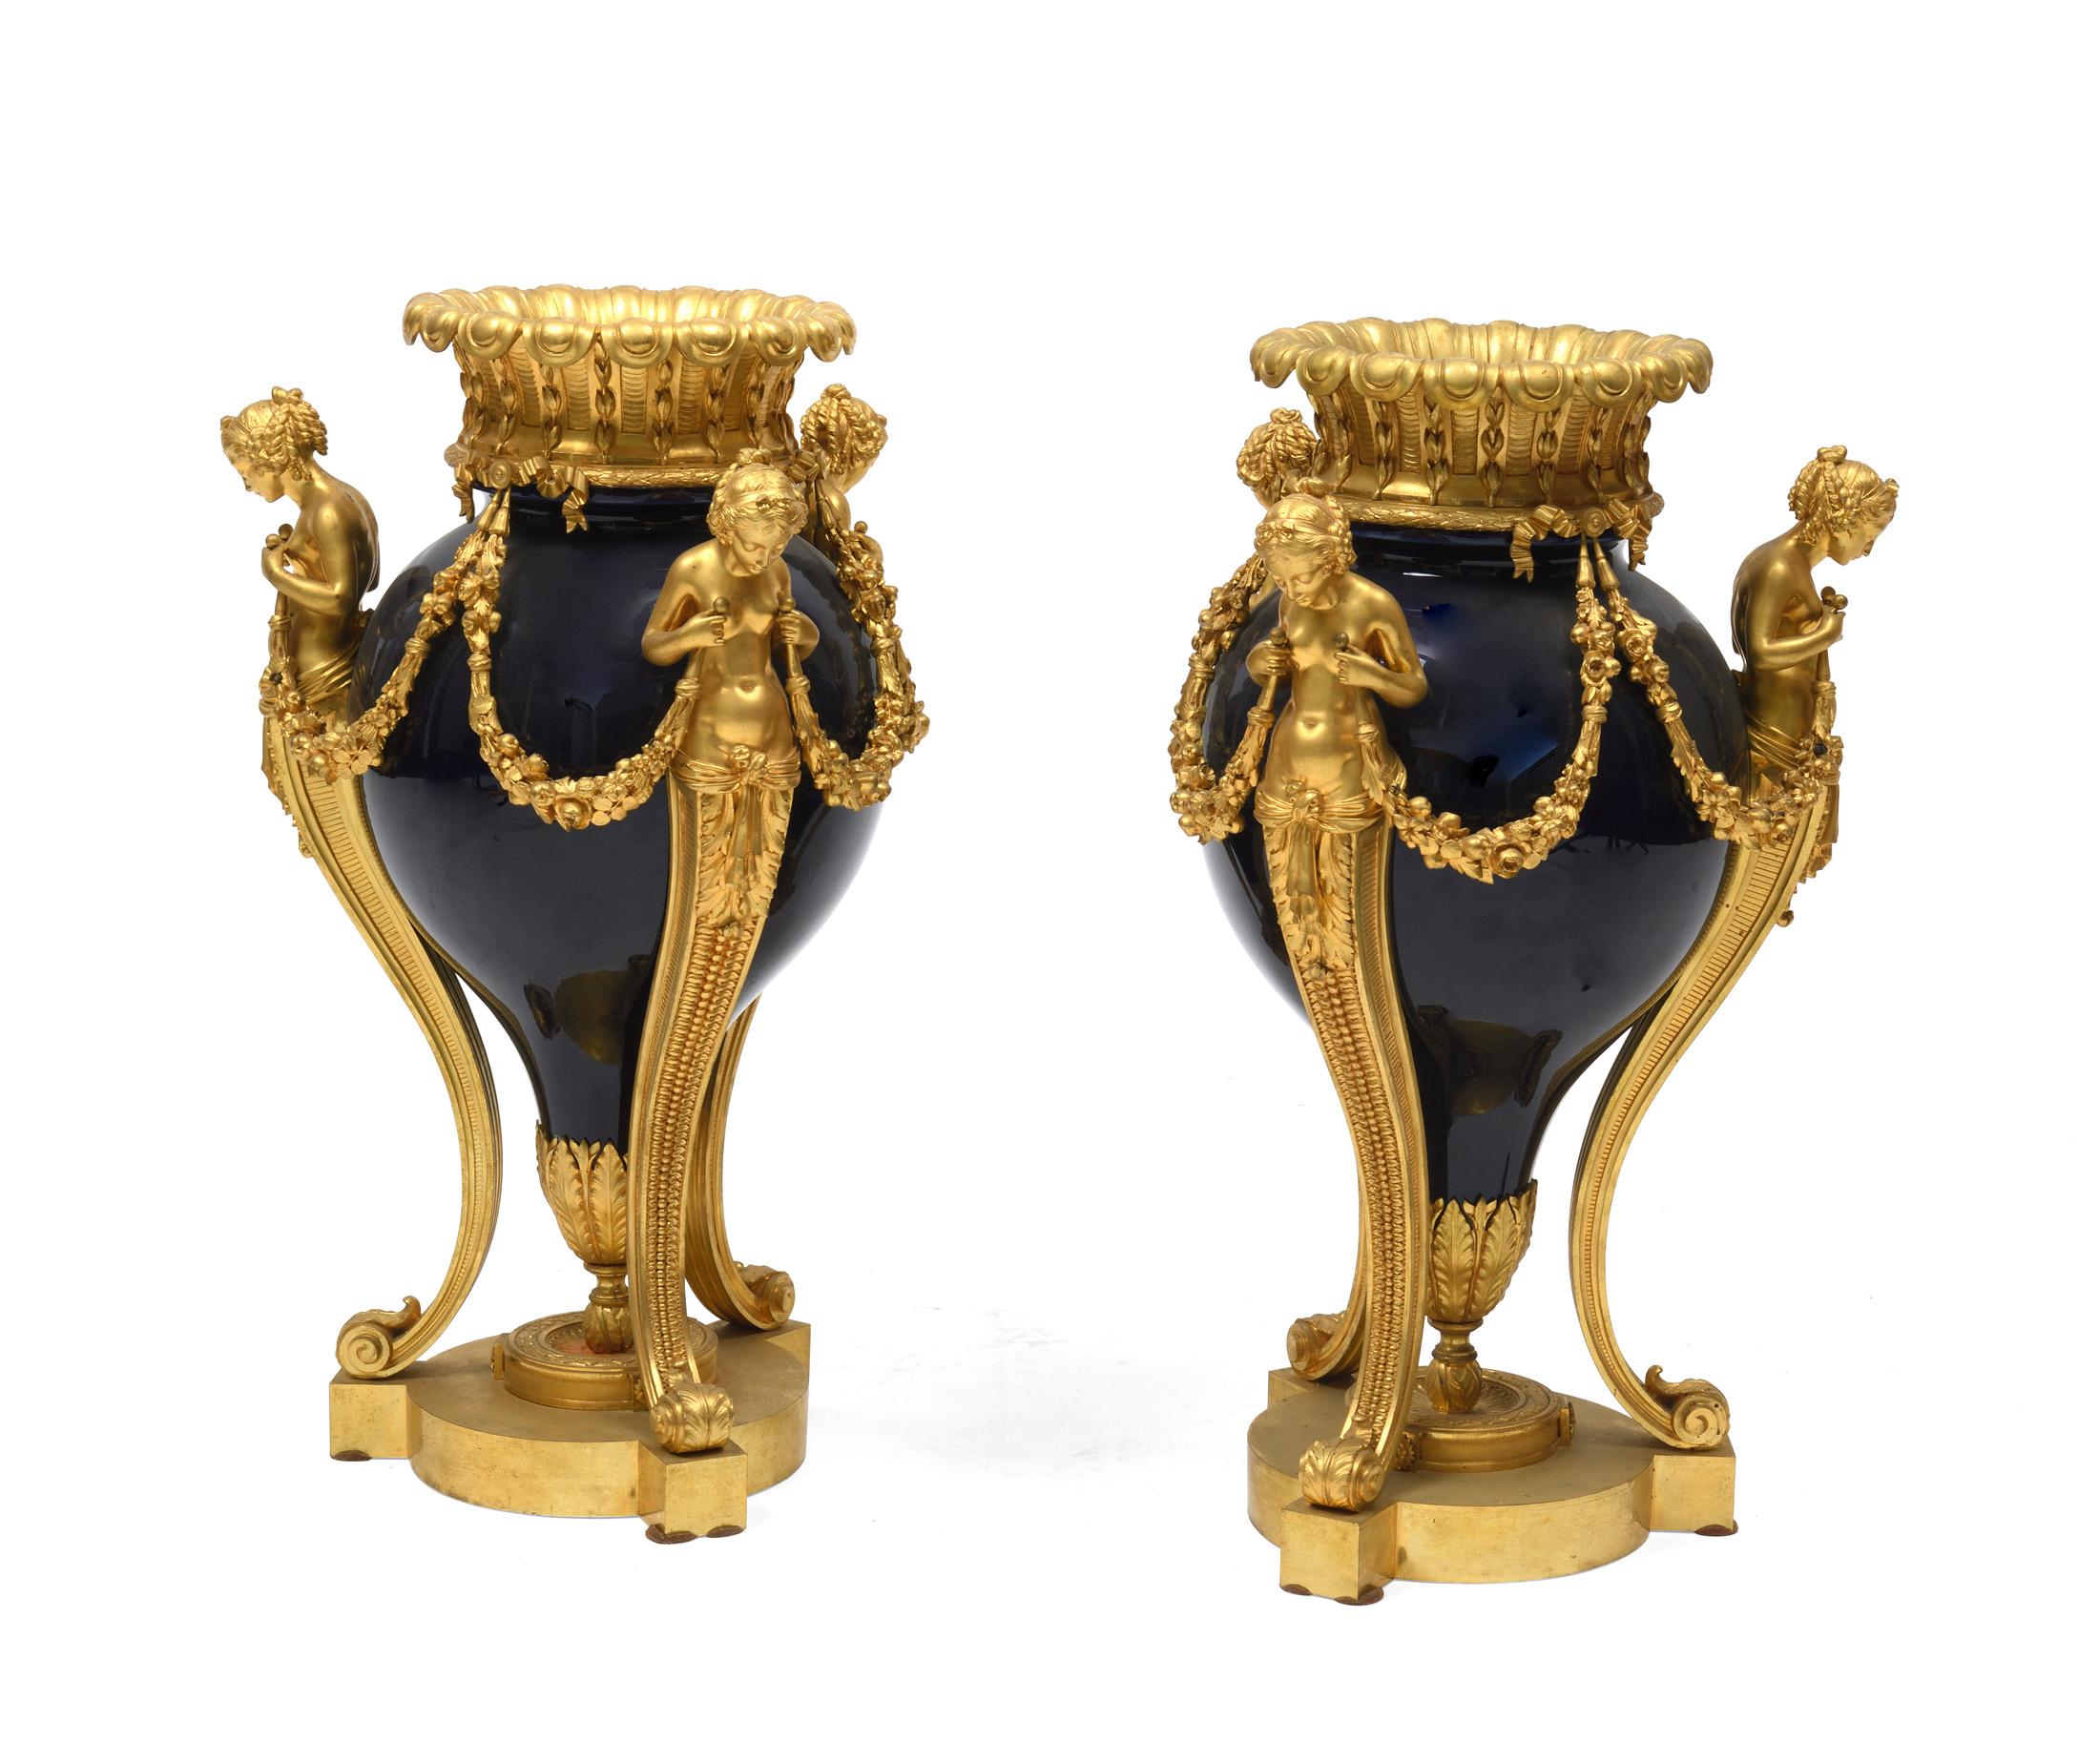 Pair of vases bronze and porcelain blue cobalt with bronze women,s heads on the sides .the bronze of these vases are of great quality Not sign but they was made for sure by a great bronzier of that parisian time.
You have this model in most of the